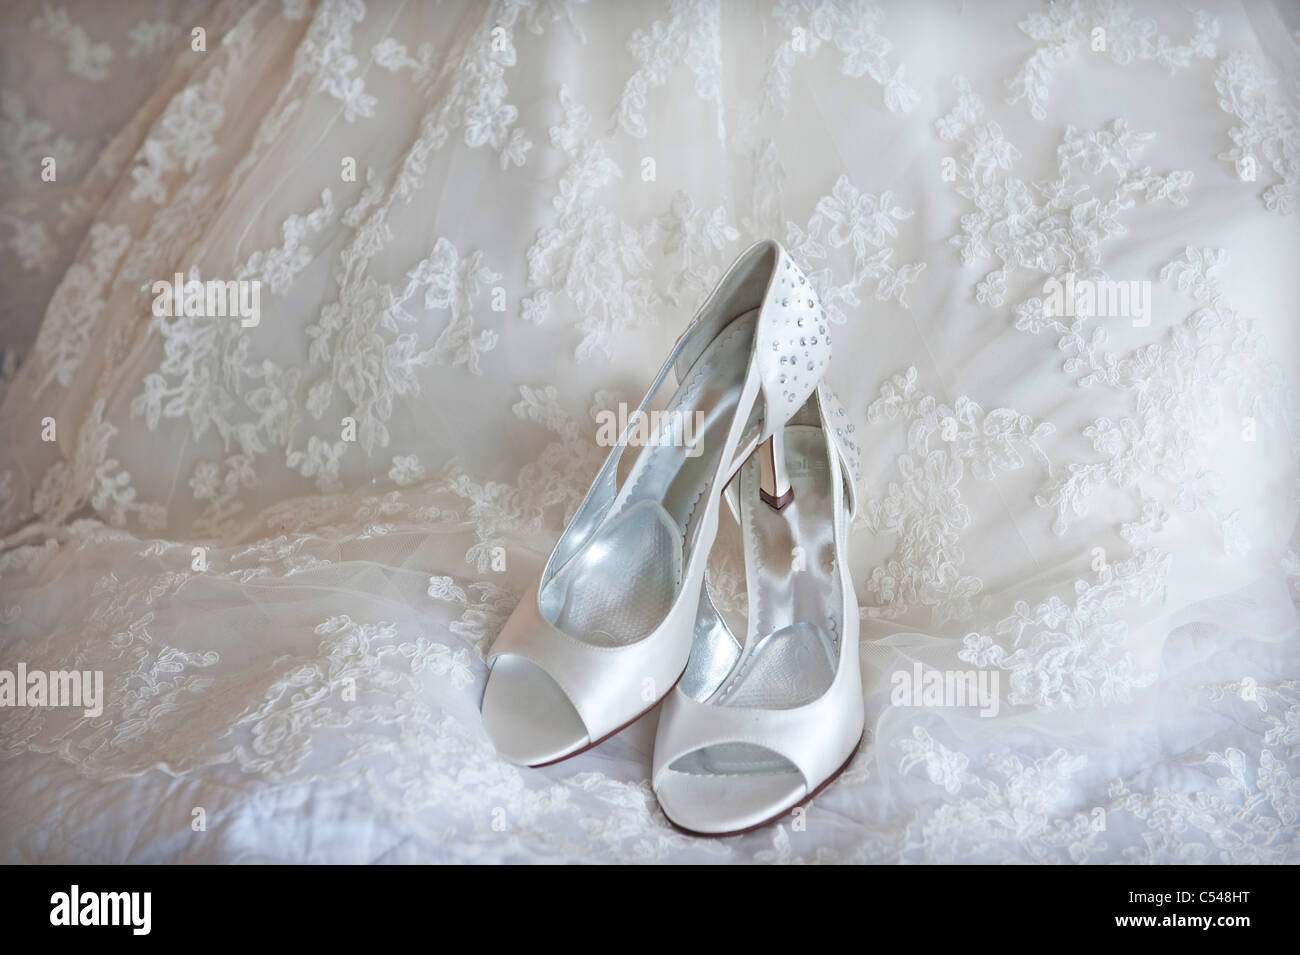 wedding dress and shoes Stock Photo